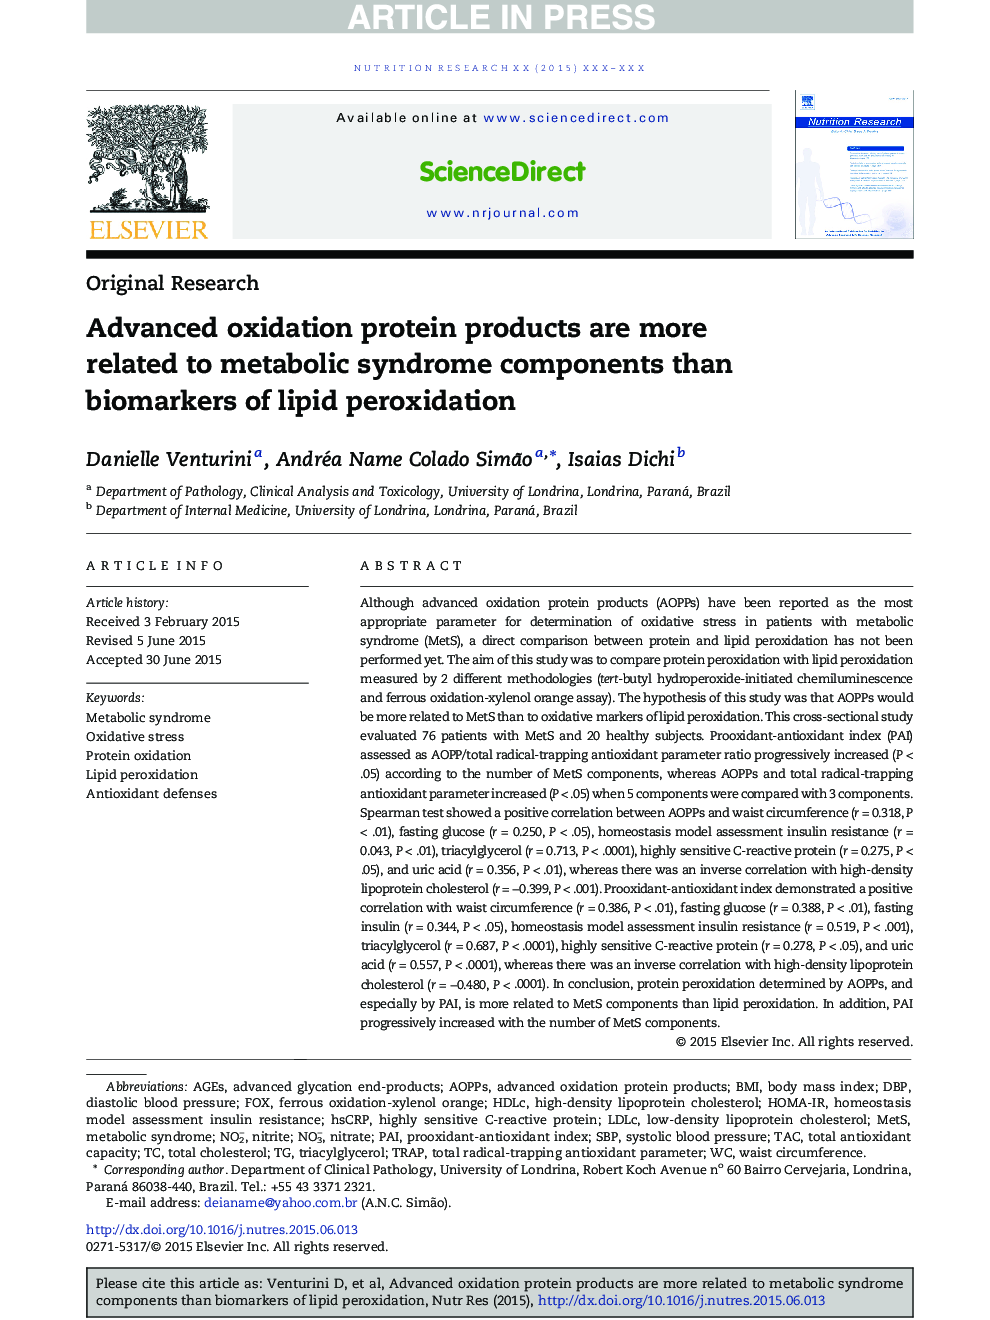 Advanced oxidation protein products are more related to metabolic syndrome components than biomarkers of lipid peroxidation